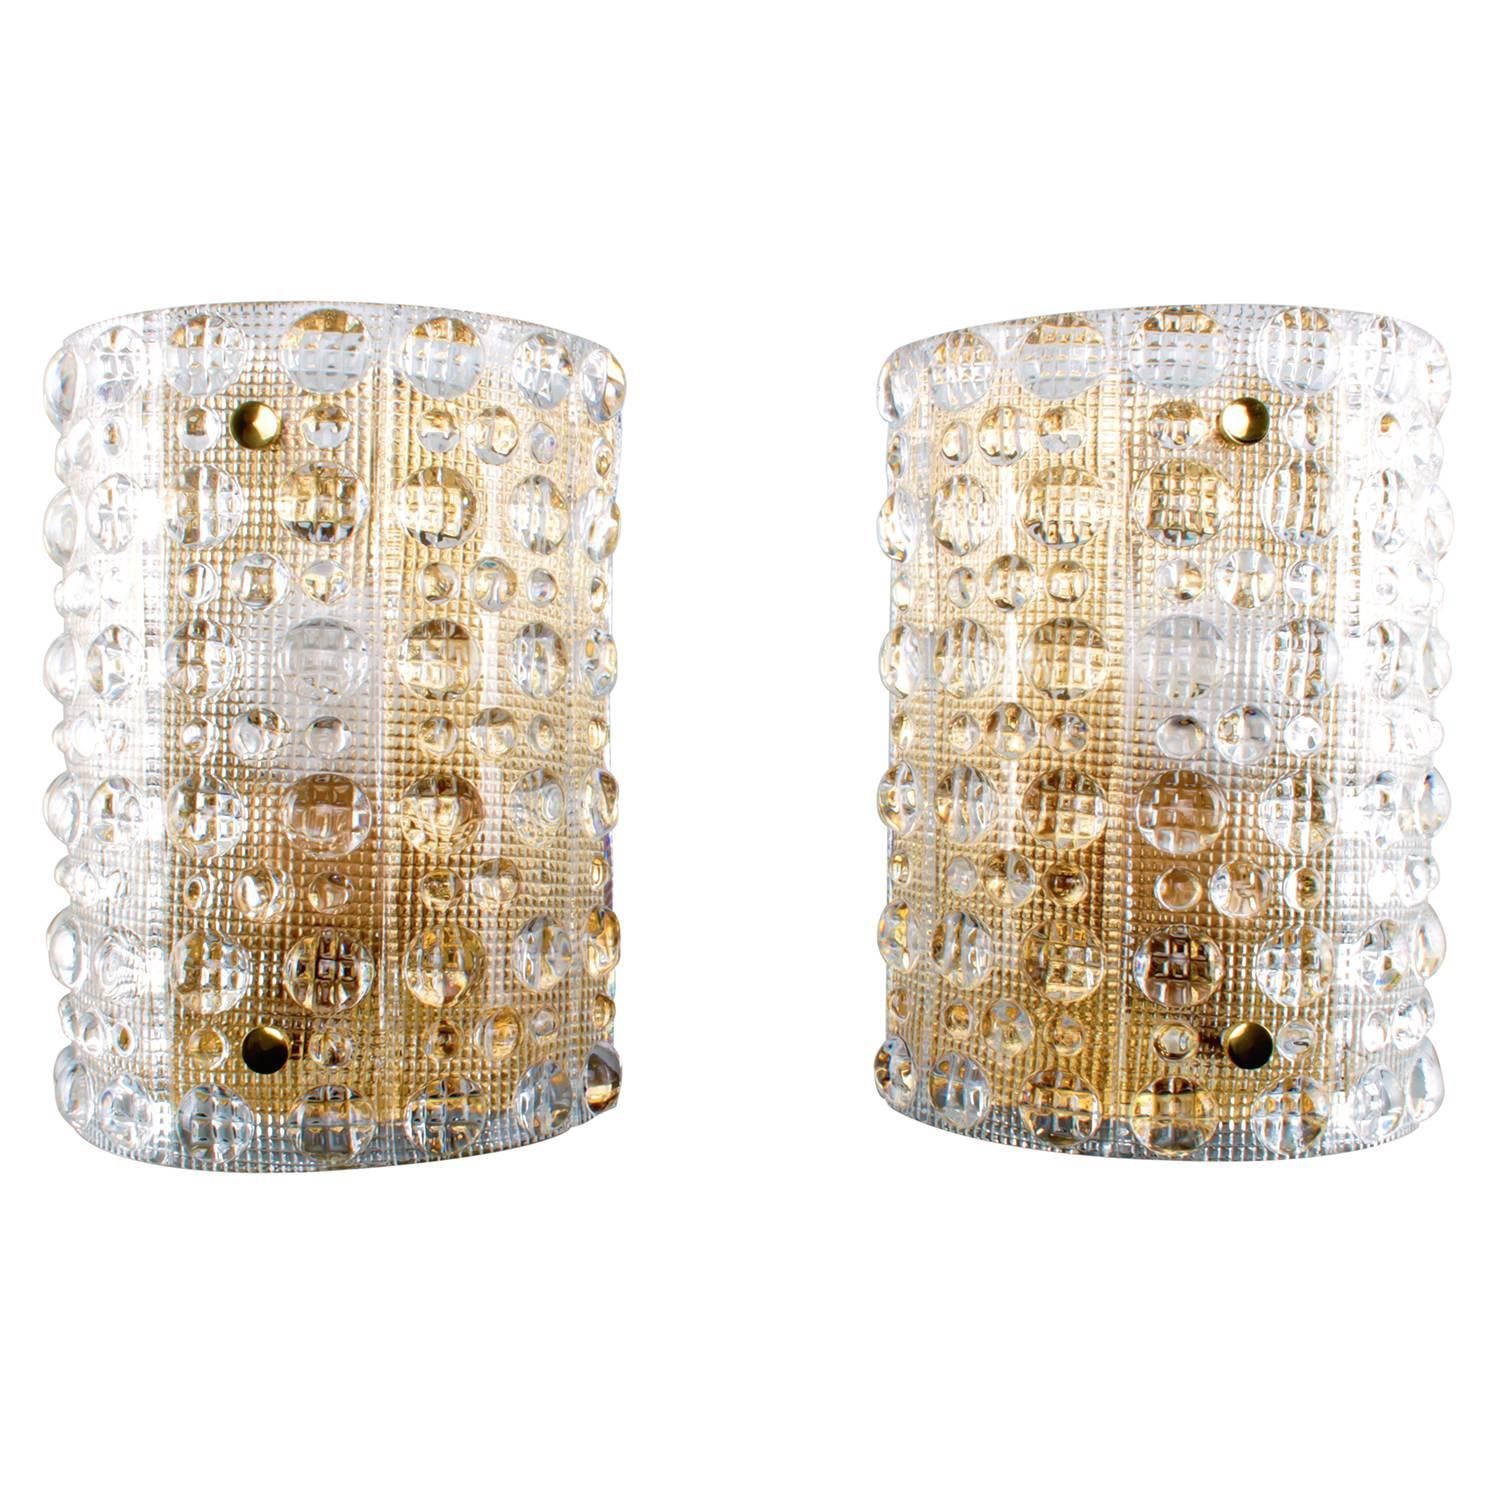 Scandinavian Modern Pair of Crystal Sconces, Wall Lamps, Carl Fagerlund, Orrefors, Rare Wall Lights For Sale